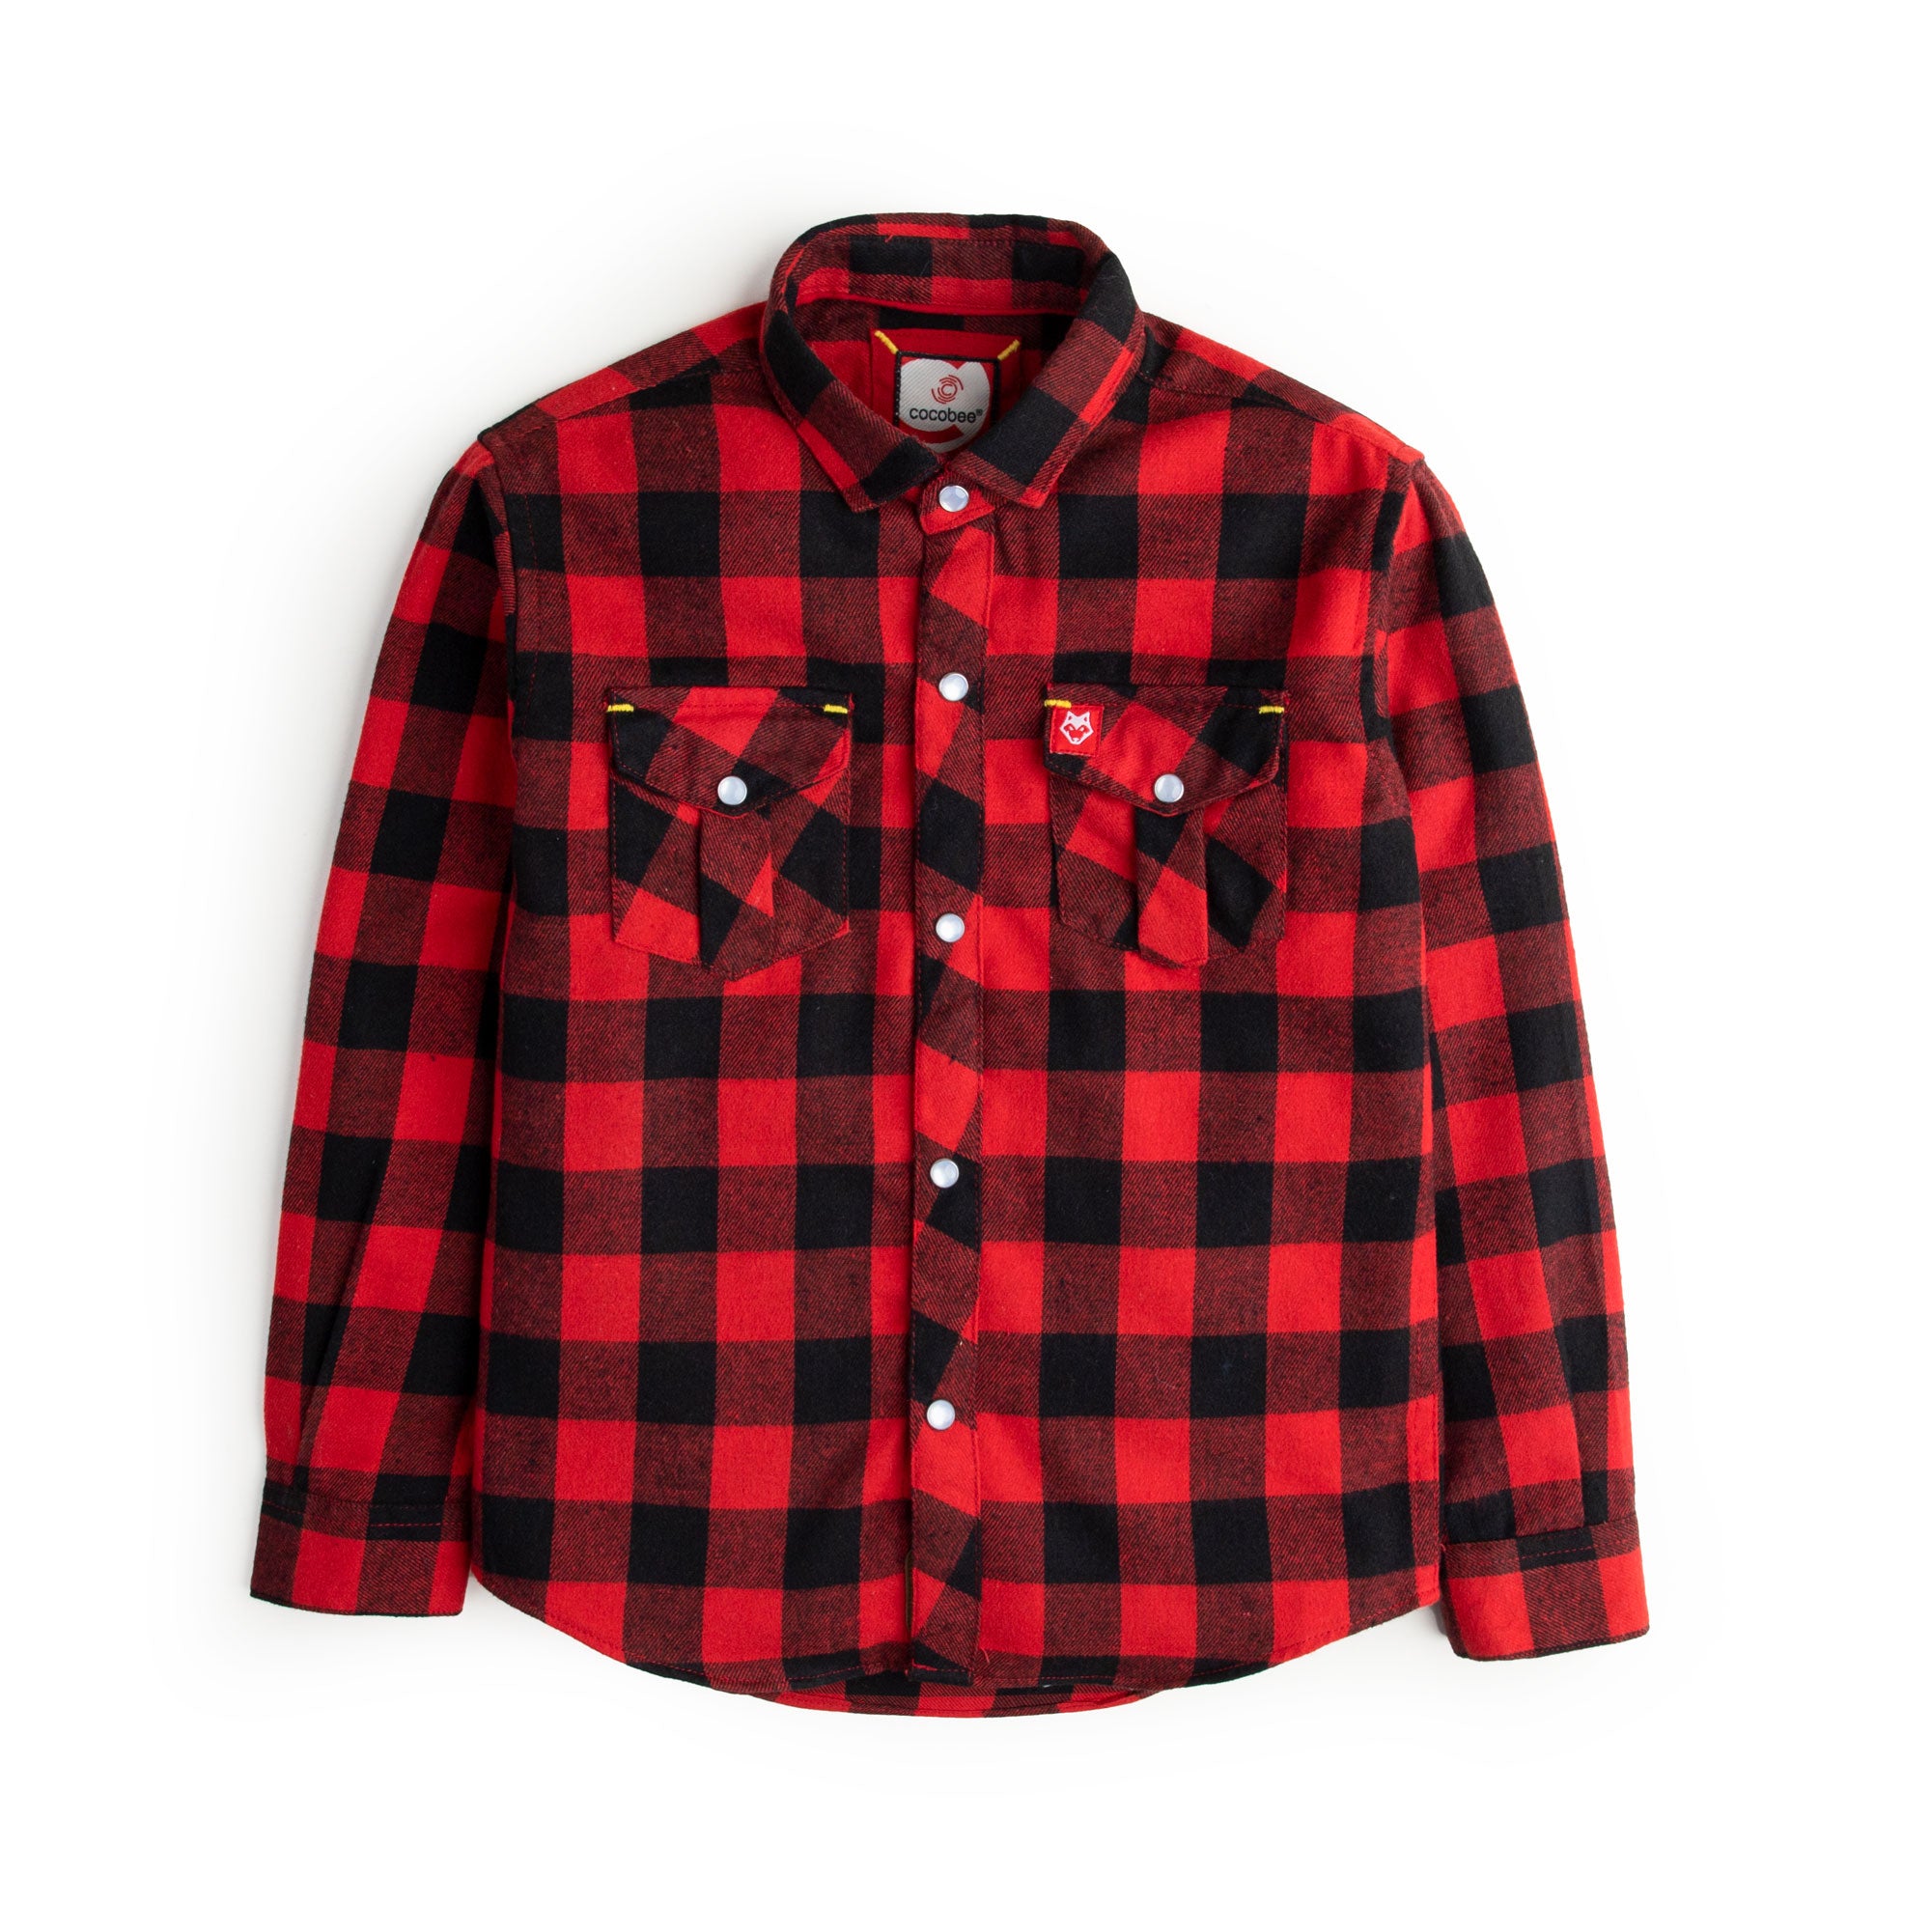 Two Tone Checkered Flannel Shirt